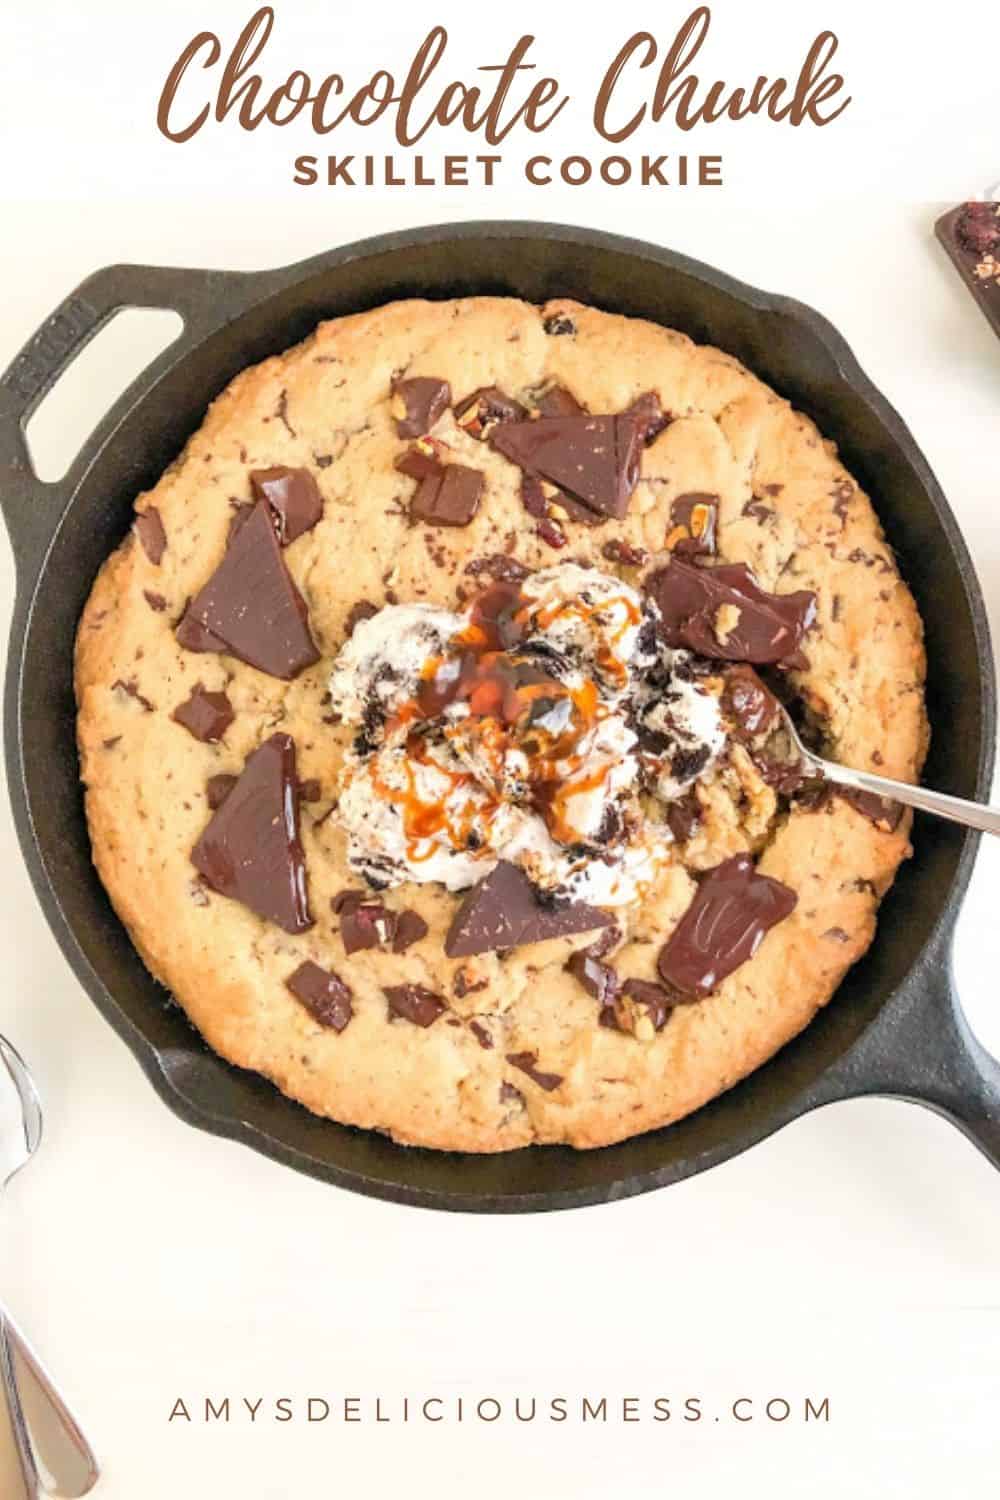 Skillet cookie in black cast iron pan with silver spoons, scoops of ice cream, and salted caramel sauce. Part of chocolate bar with dried fruit and nuts in the background. Small silver spoons next to the cast iron skillet.